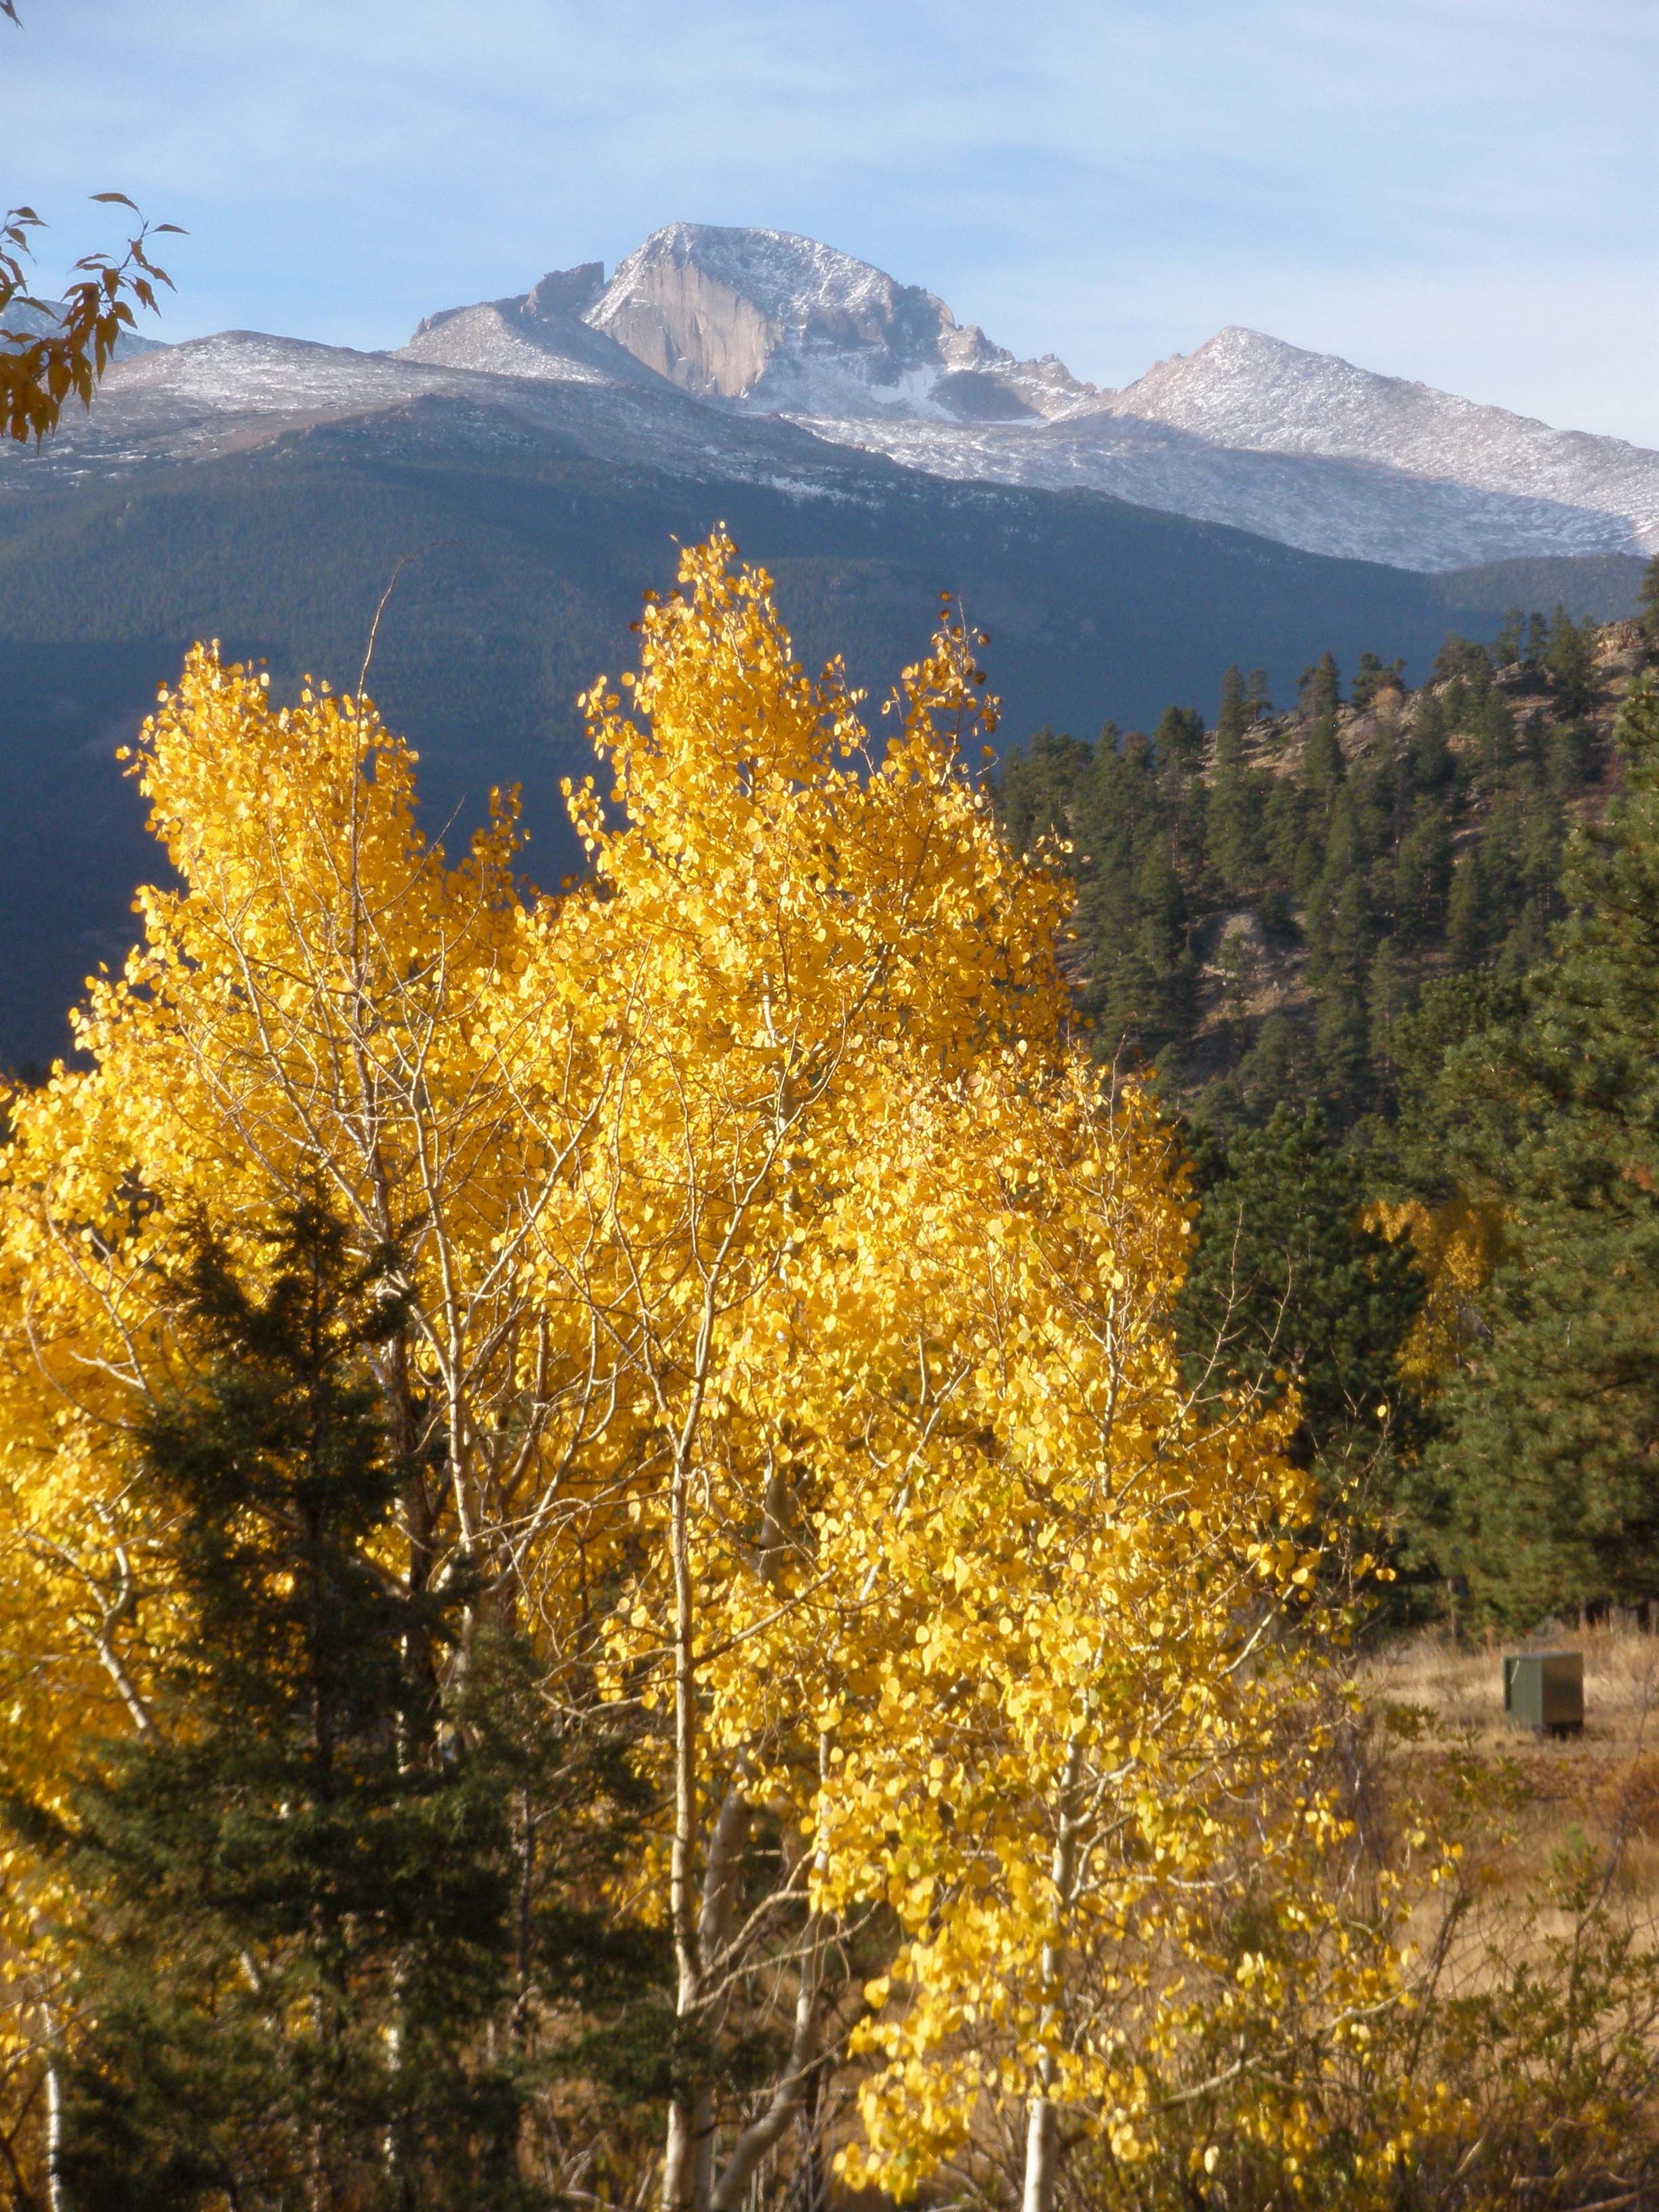 Special Evening Programs For The Labor Day Weekend Highlight Longs Peak